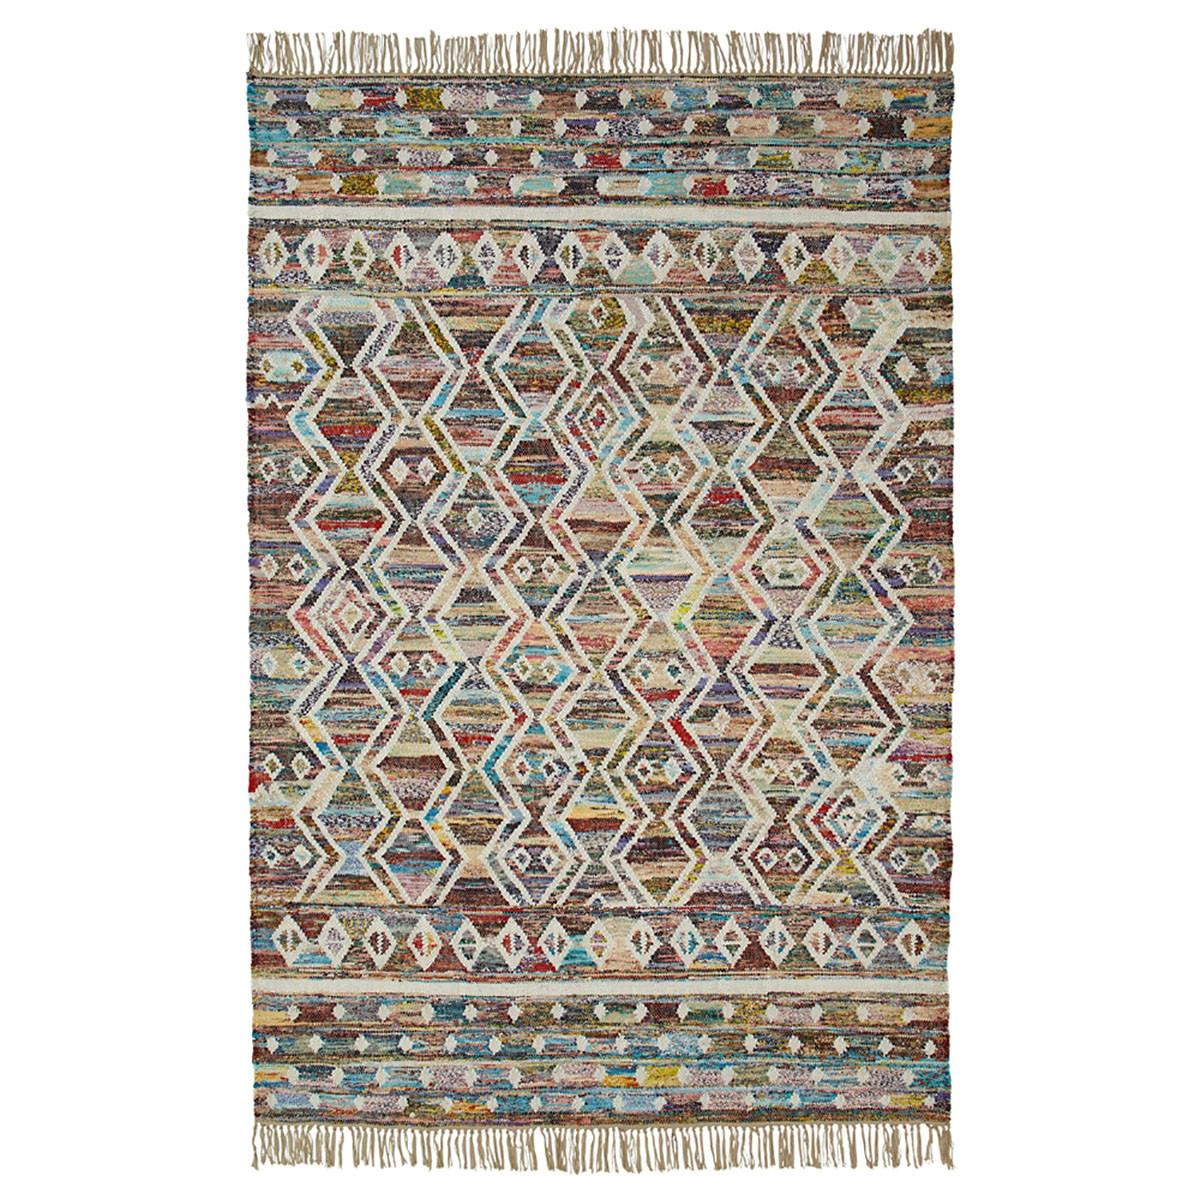 8' X 10' Ivory Blue Pink Gold And Green Geometric Hand Woven Area Rug With Fringe